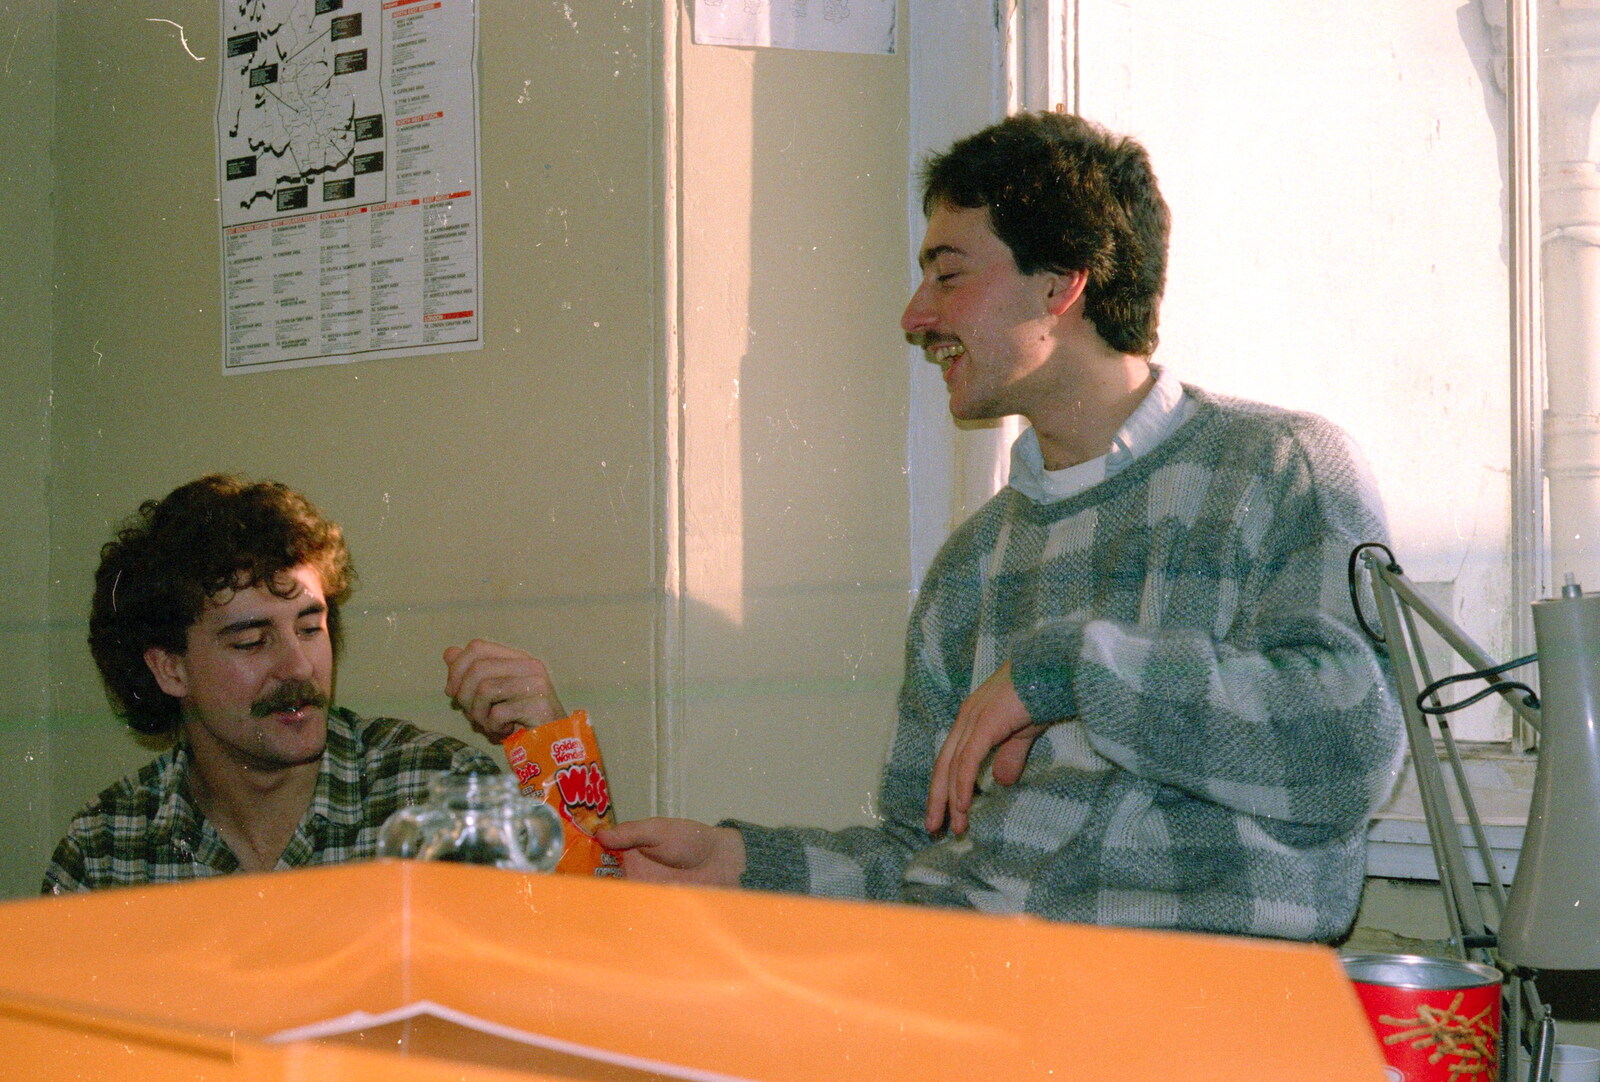 Mark offers Sam Kennedy a bag of Wotsits from Uni: The Fly Christmas Party and BABS Panto, Plymouth Polytechnic, Devon - December 11th 1985